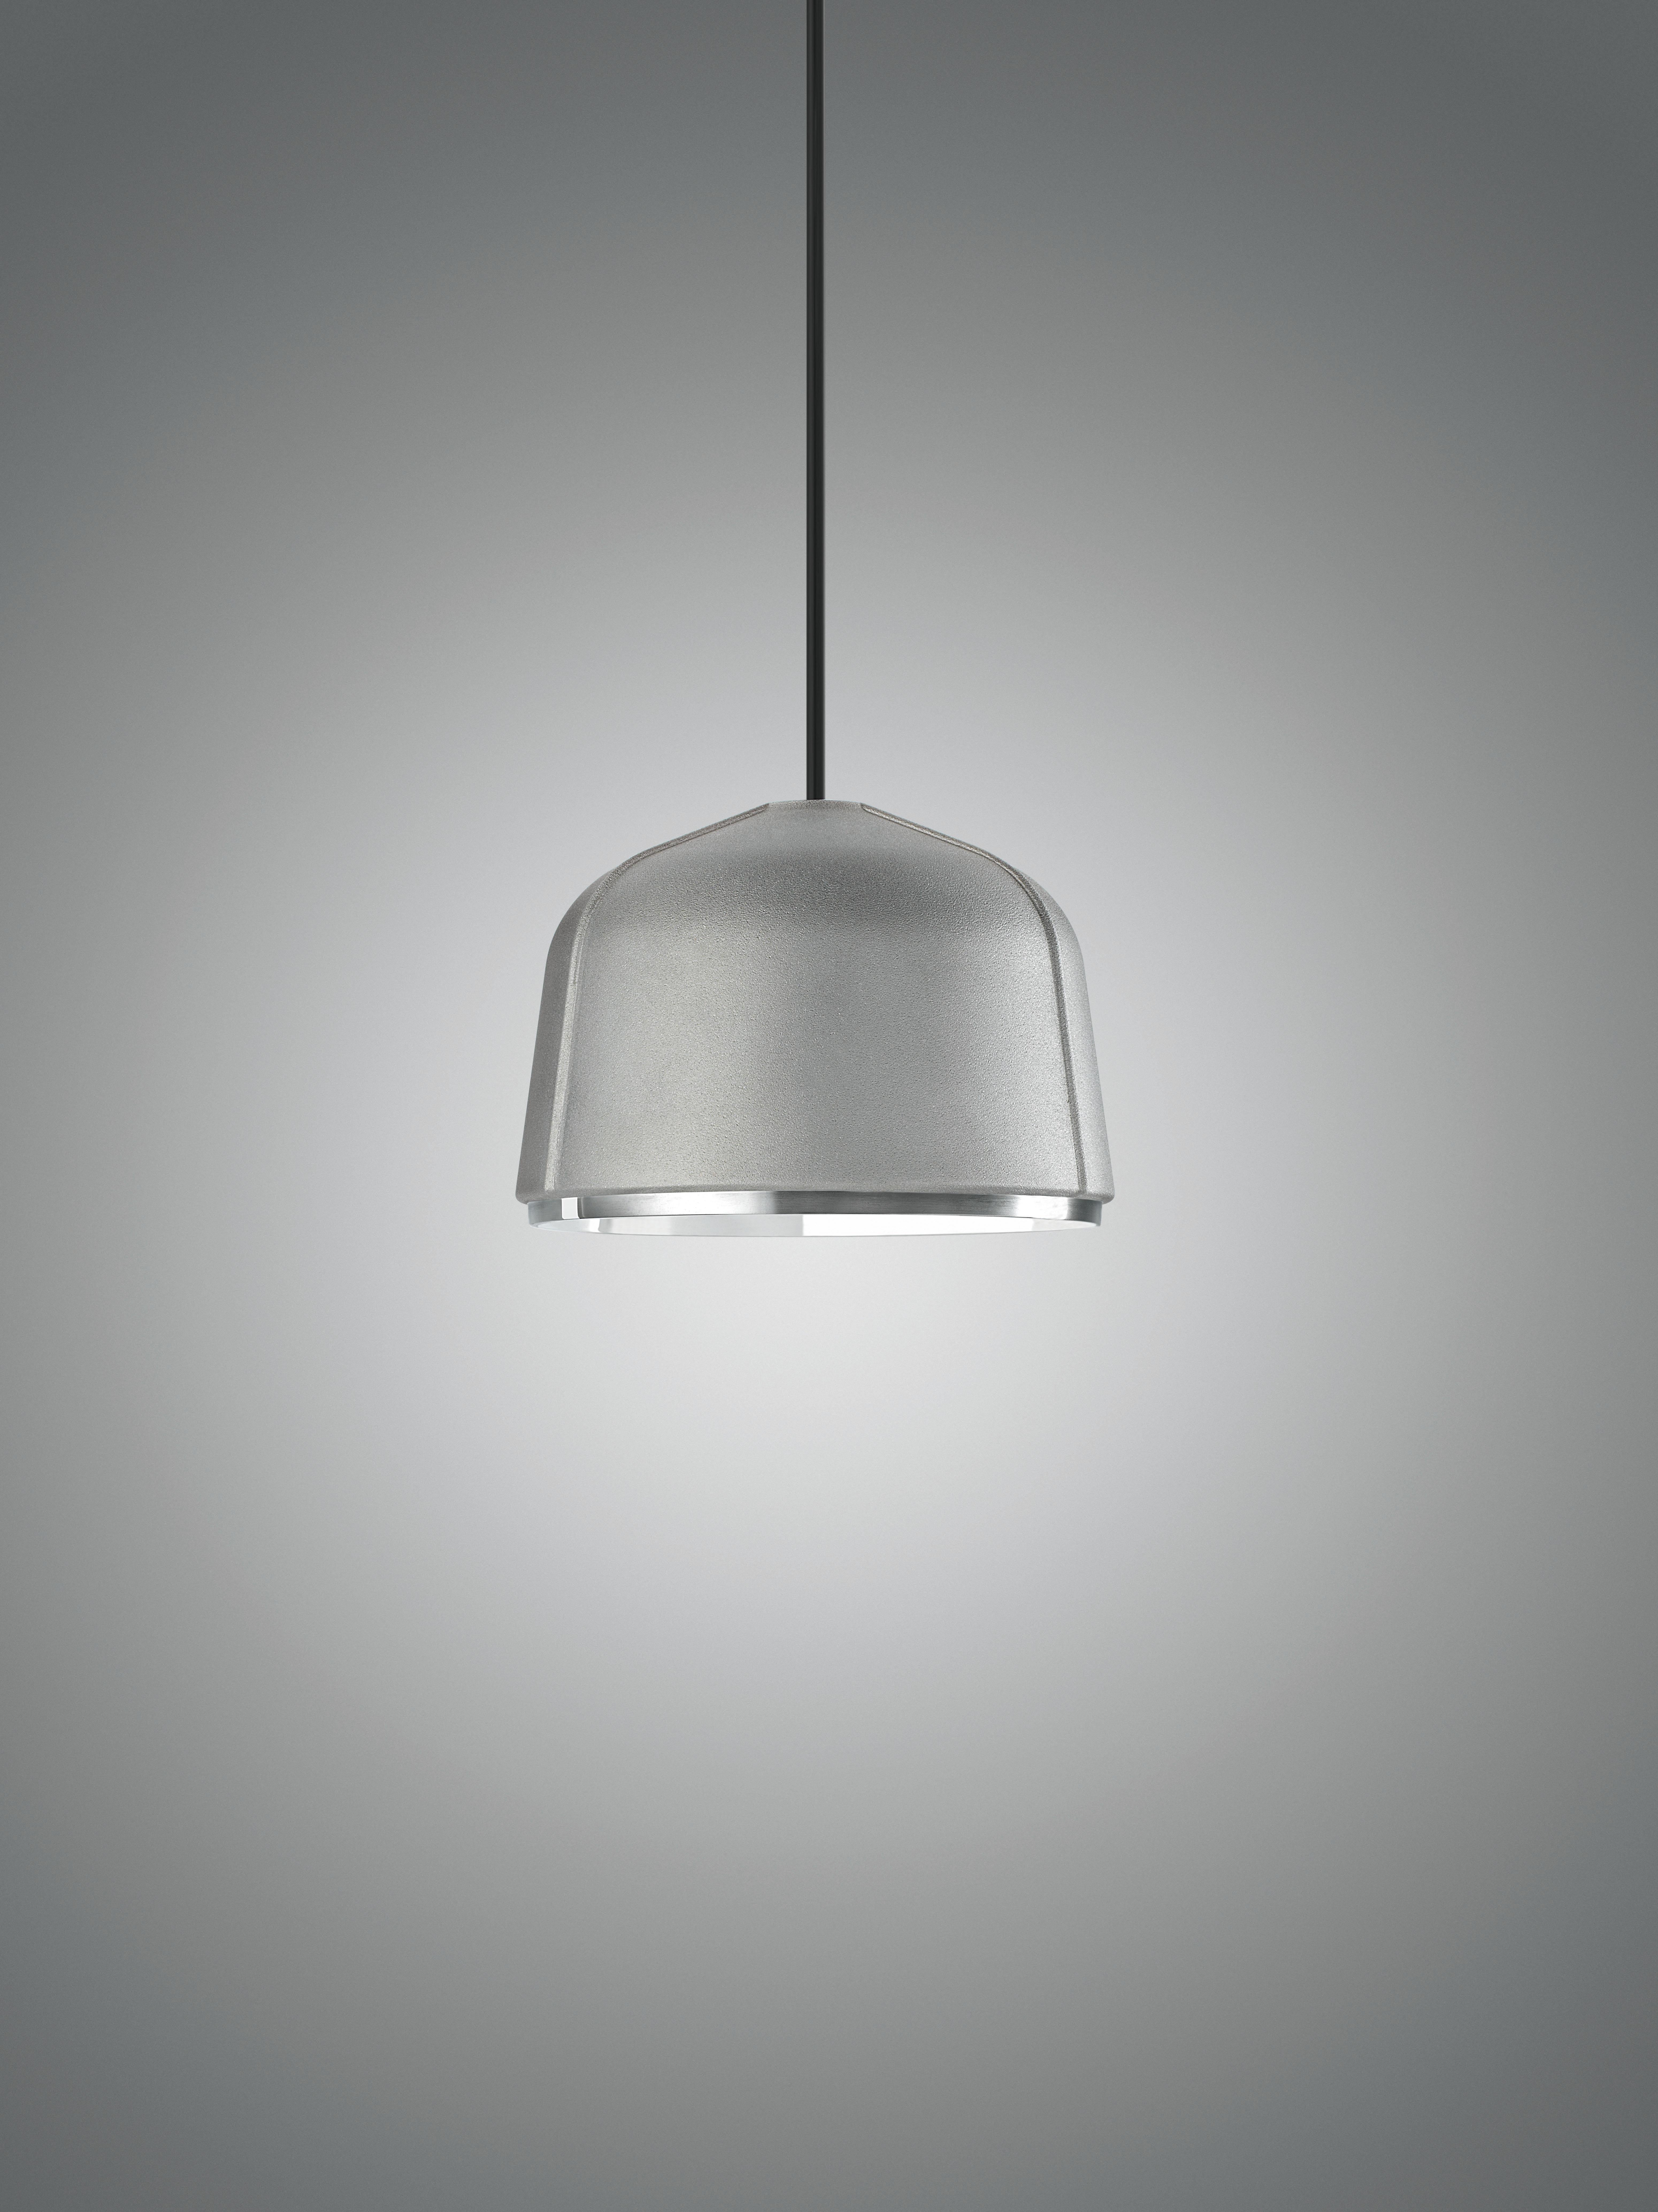 Suspension lamp with direct down light and built-in Acrich dimmable Triac LED. The die cast aluminium dome is processed on the outside by manual sanding to create the matt effect aluminium, while the inside is hand-polished and liquid coated with